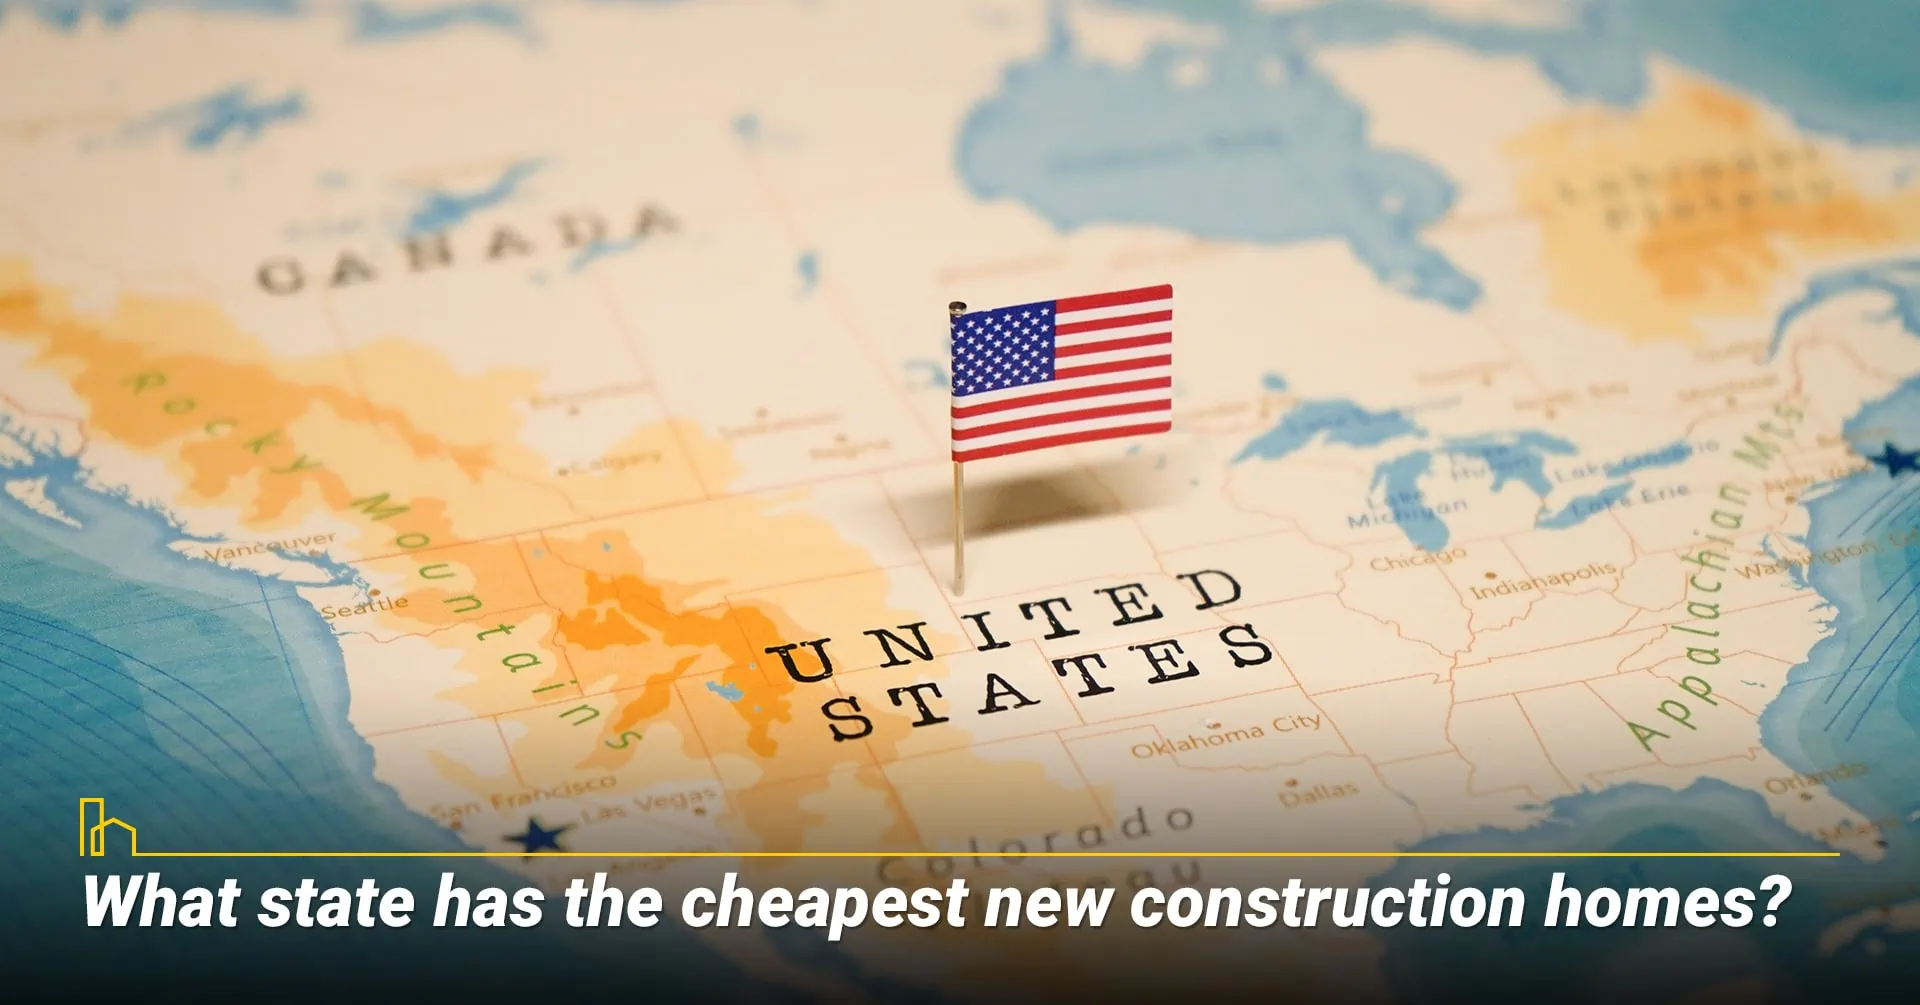 What state has the cheapest new construction homes?